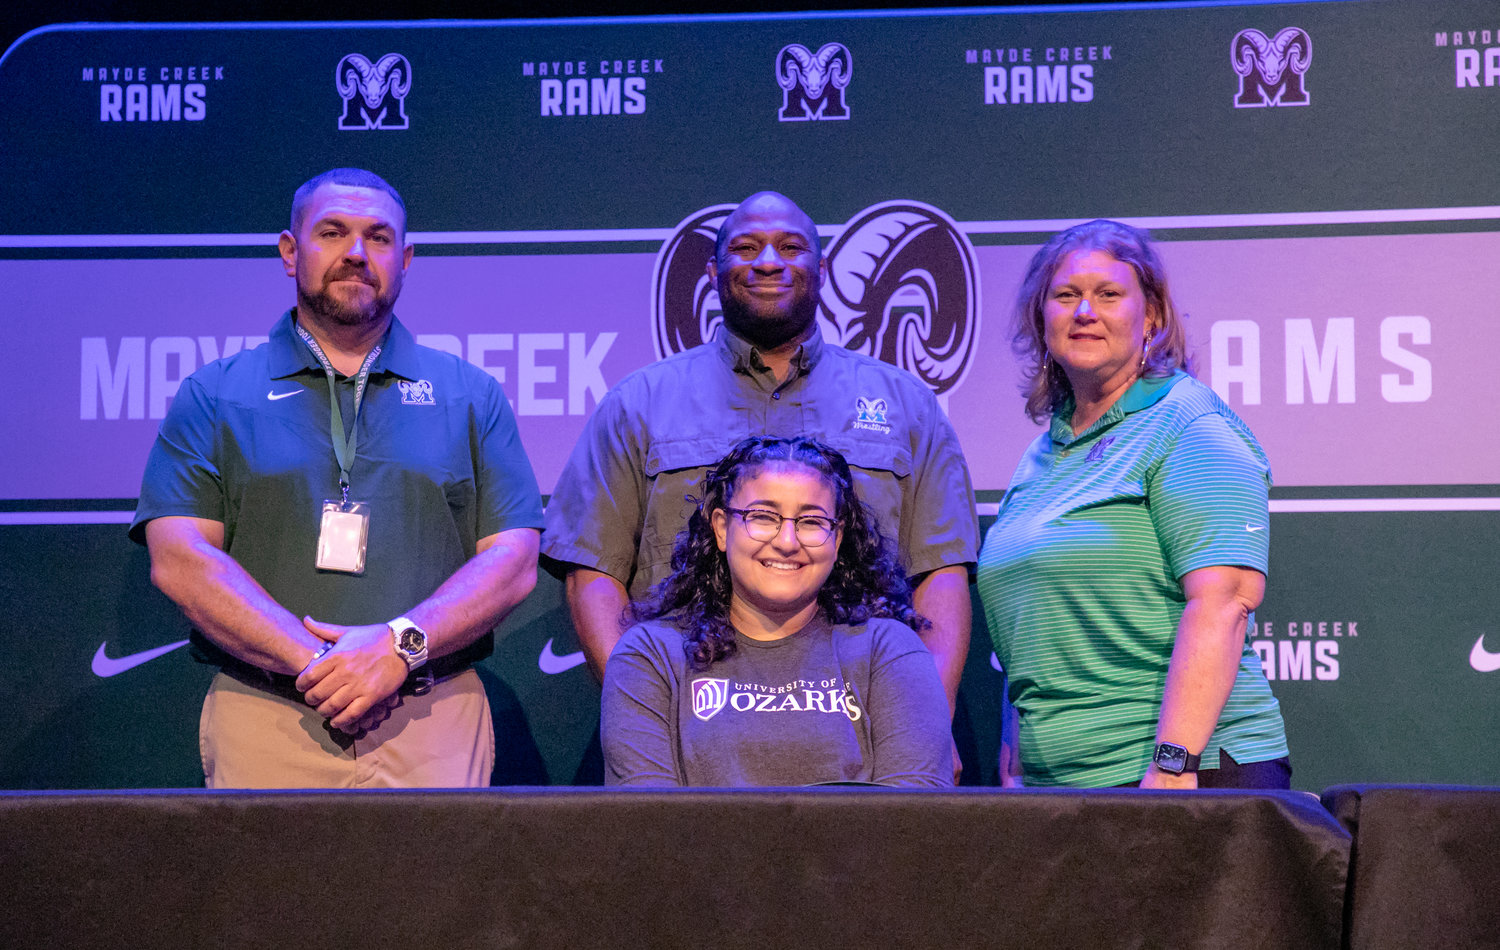 Mayde Creek's Rewa Chababo signed to wrestle at the University of the Ozarks.